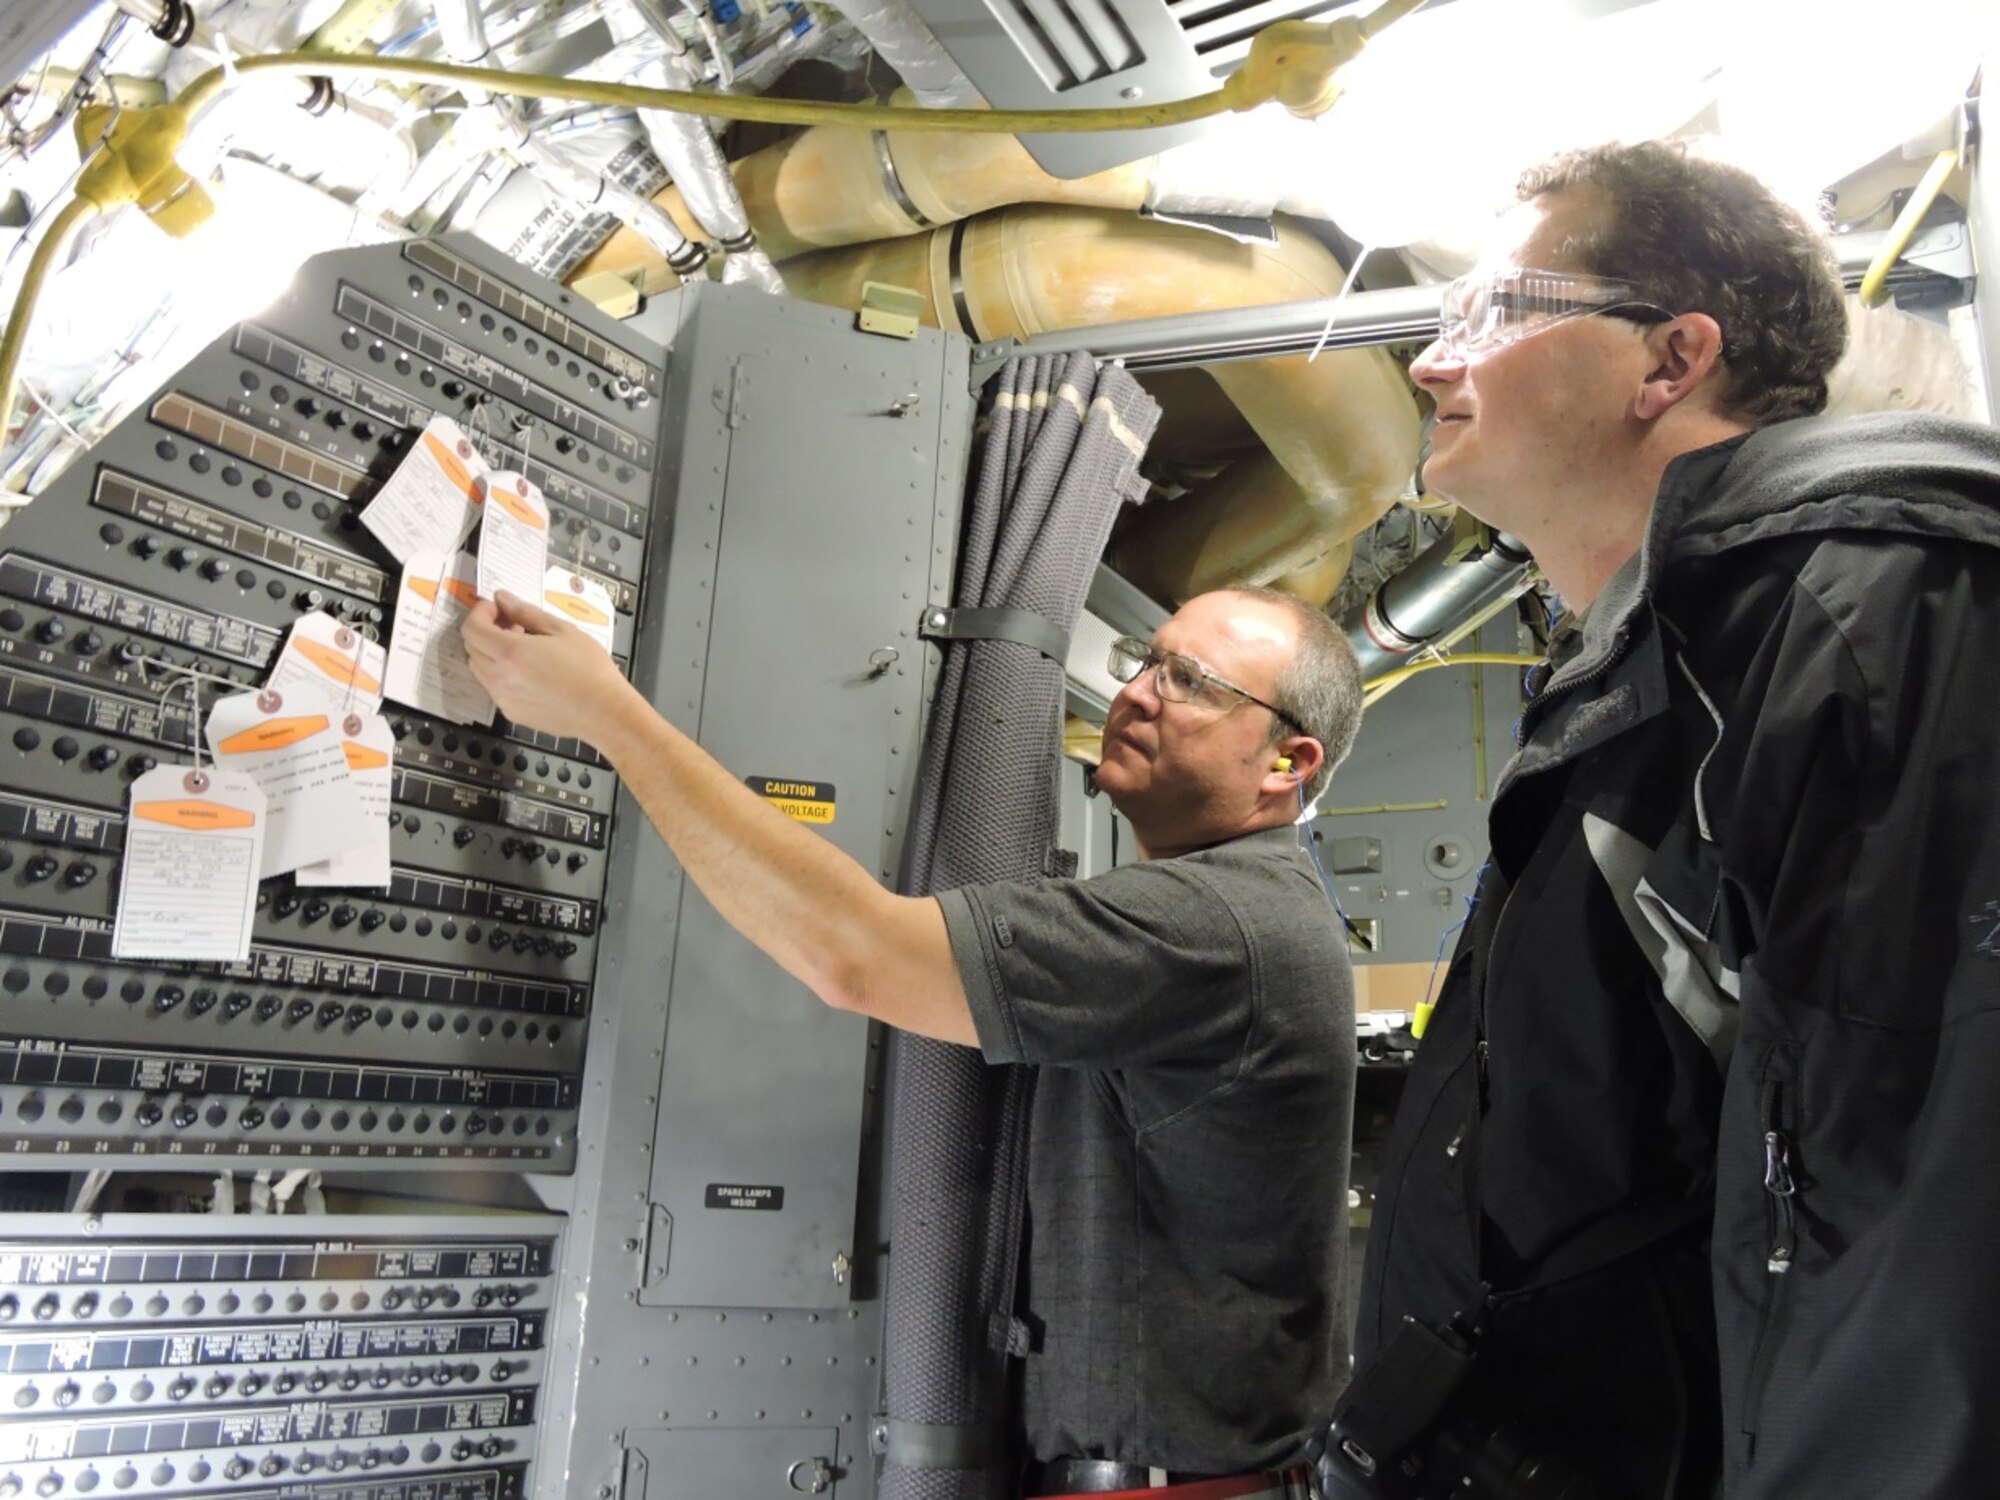 Jay Peavy, 562nd Aircraft Maintenance Squadron first-line supervisor, left, explains the electrical, component and structural work performed during recently completed Block 16 modifications on a C-17 Globemaster to Telegraph reporter Wayne Crenshaw. The Telegraph will feature the modification work in an upcoming article. (U.S. Air Force photo by Roland Leach)